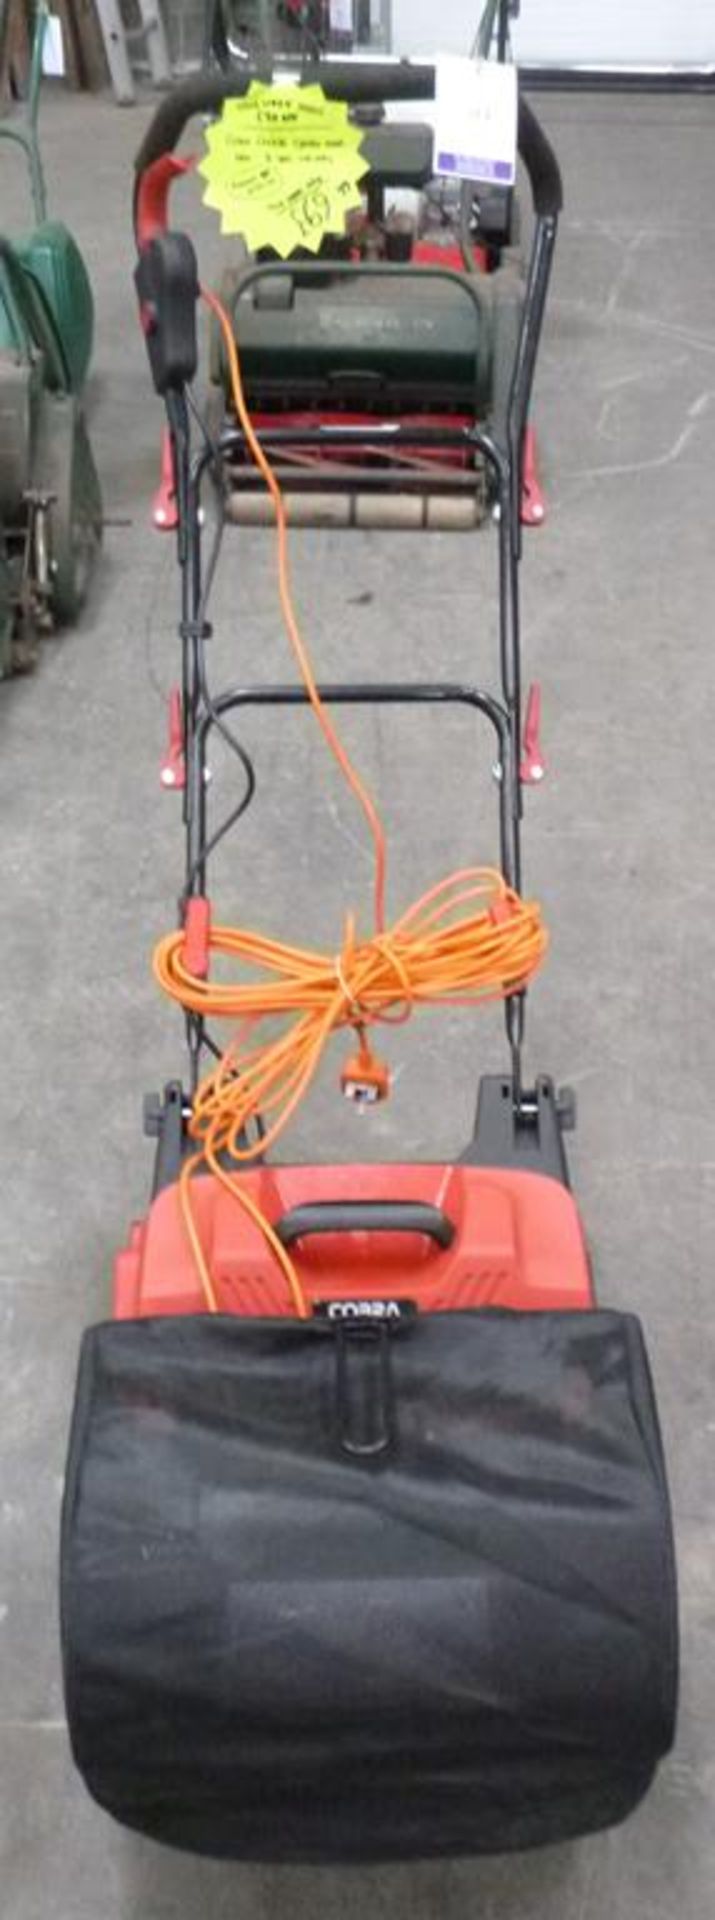 Ex Display Cobra Electric Cylinder Lawnmower CM32E. Shop Price £69 - Image 3 of 3